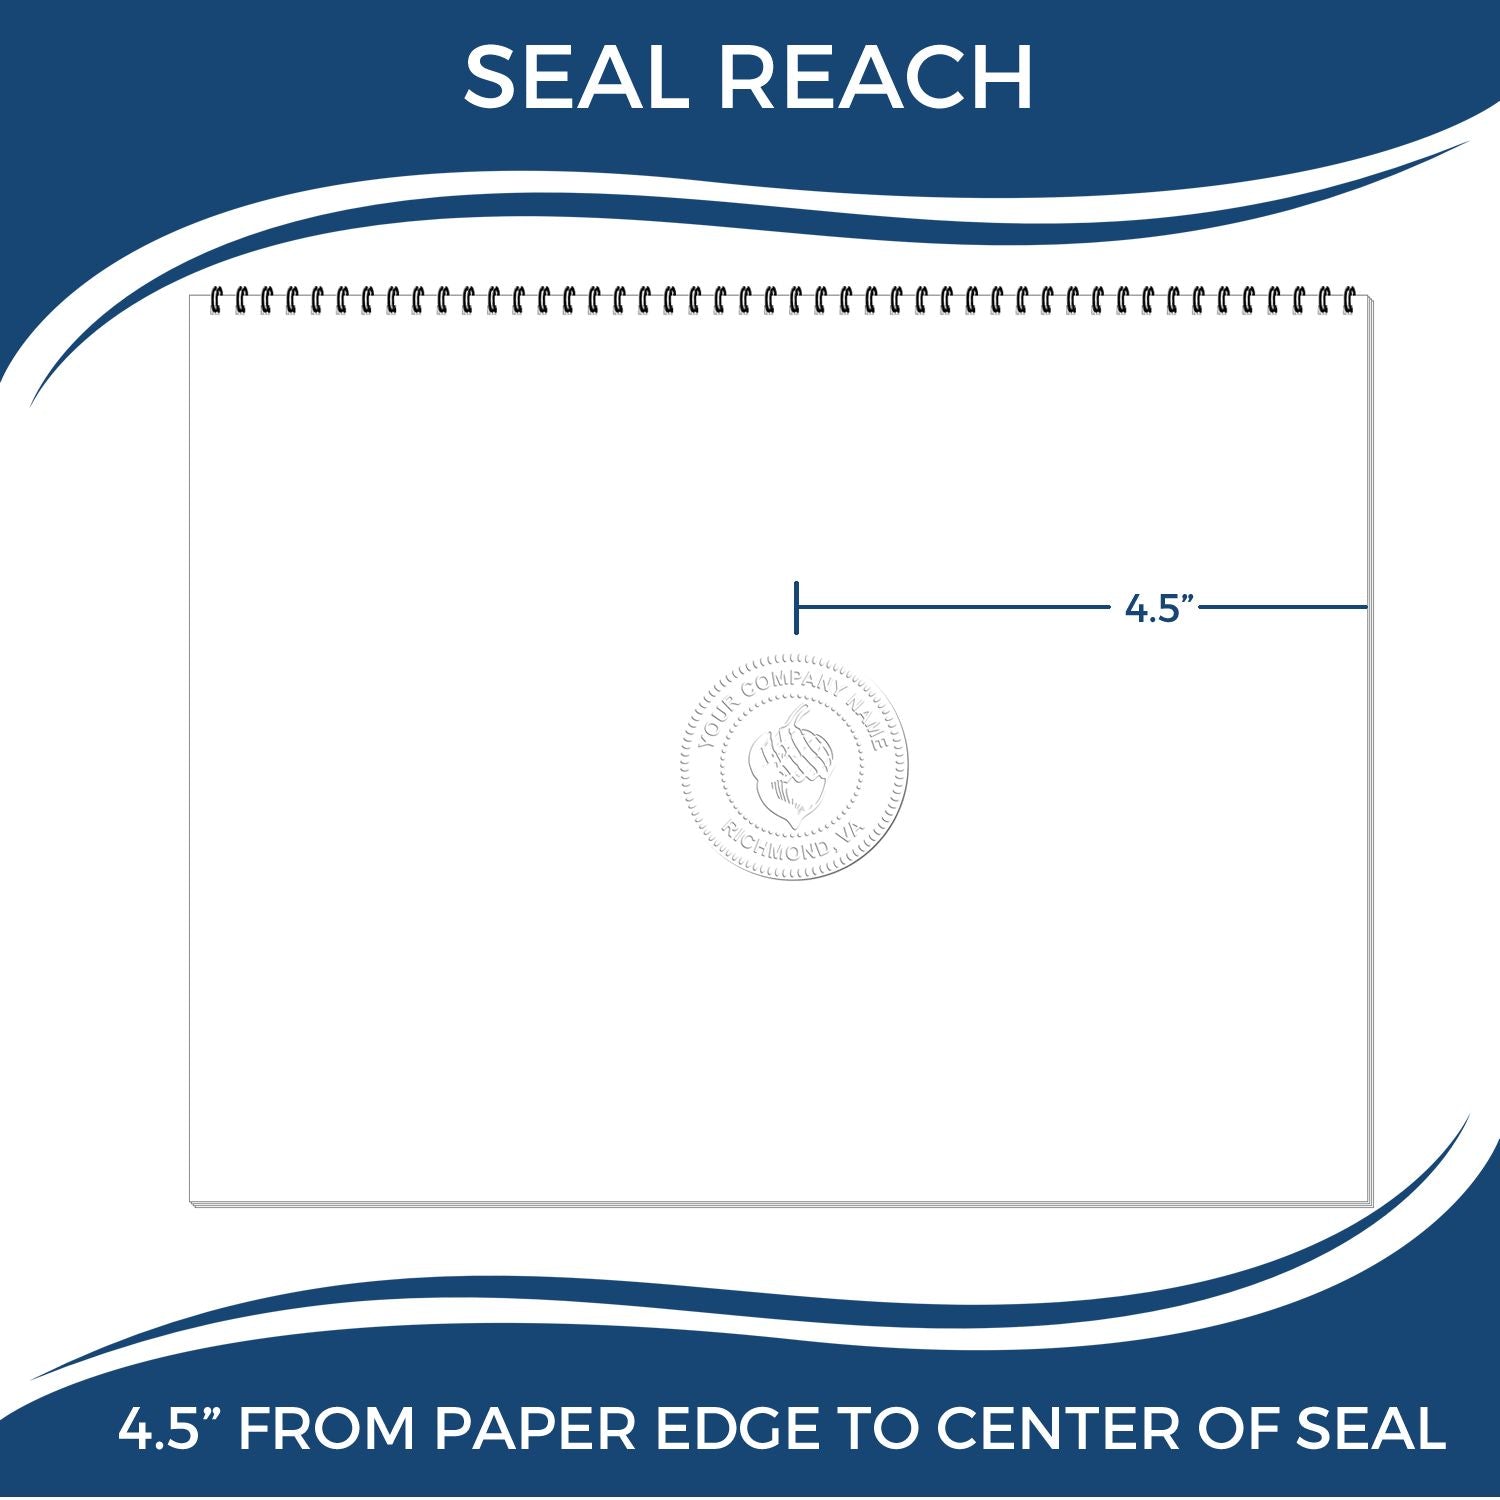 An infographic showing the seal reach which is represented by a ruler and a miniature seal image of the State of Kentucky Extended Long Reach Landscape Architect Seal Embosser